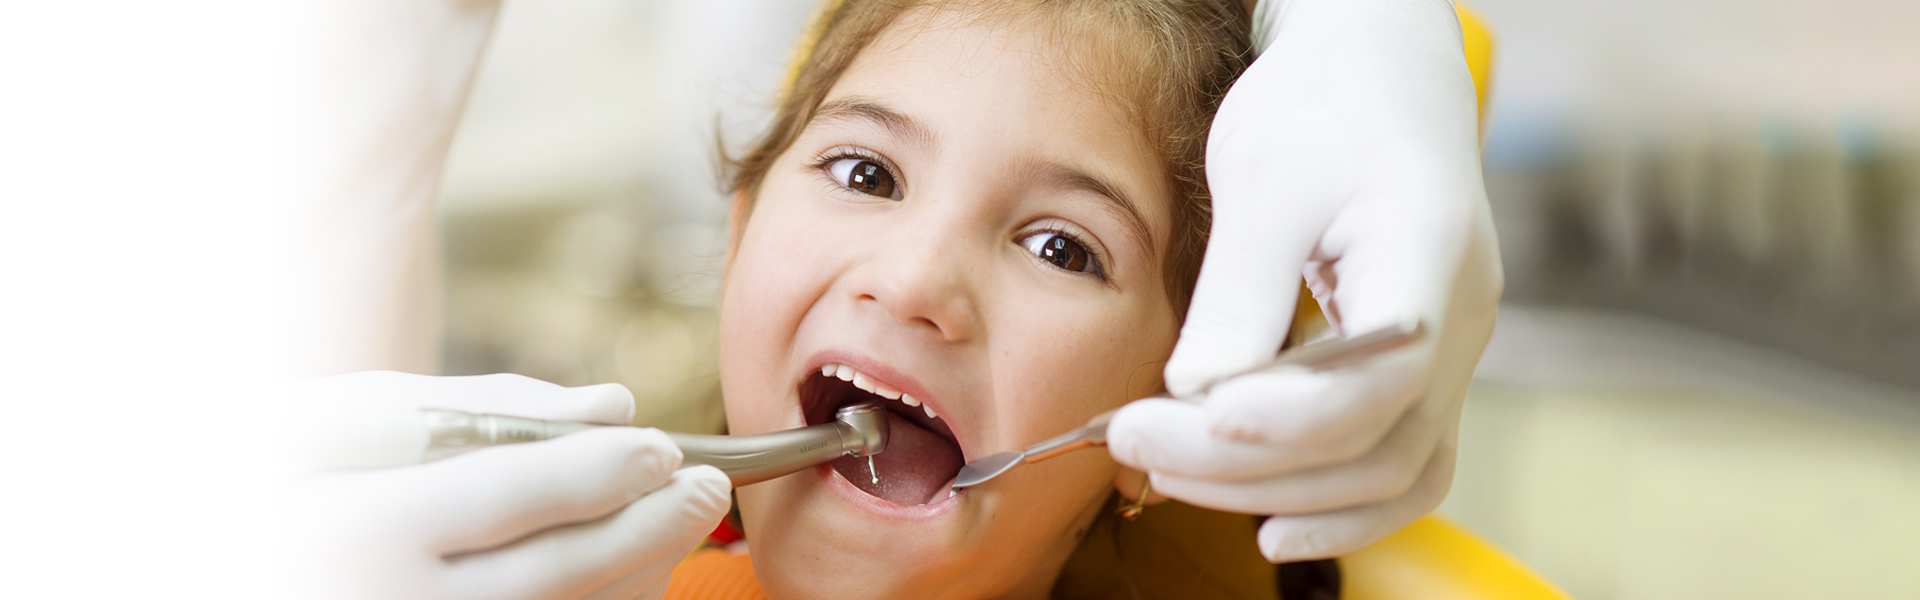 Things To Do When Your Child Cracks Or Knocks Out A Tooth